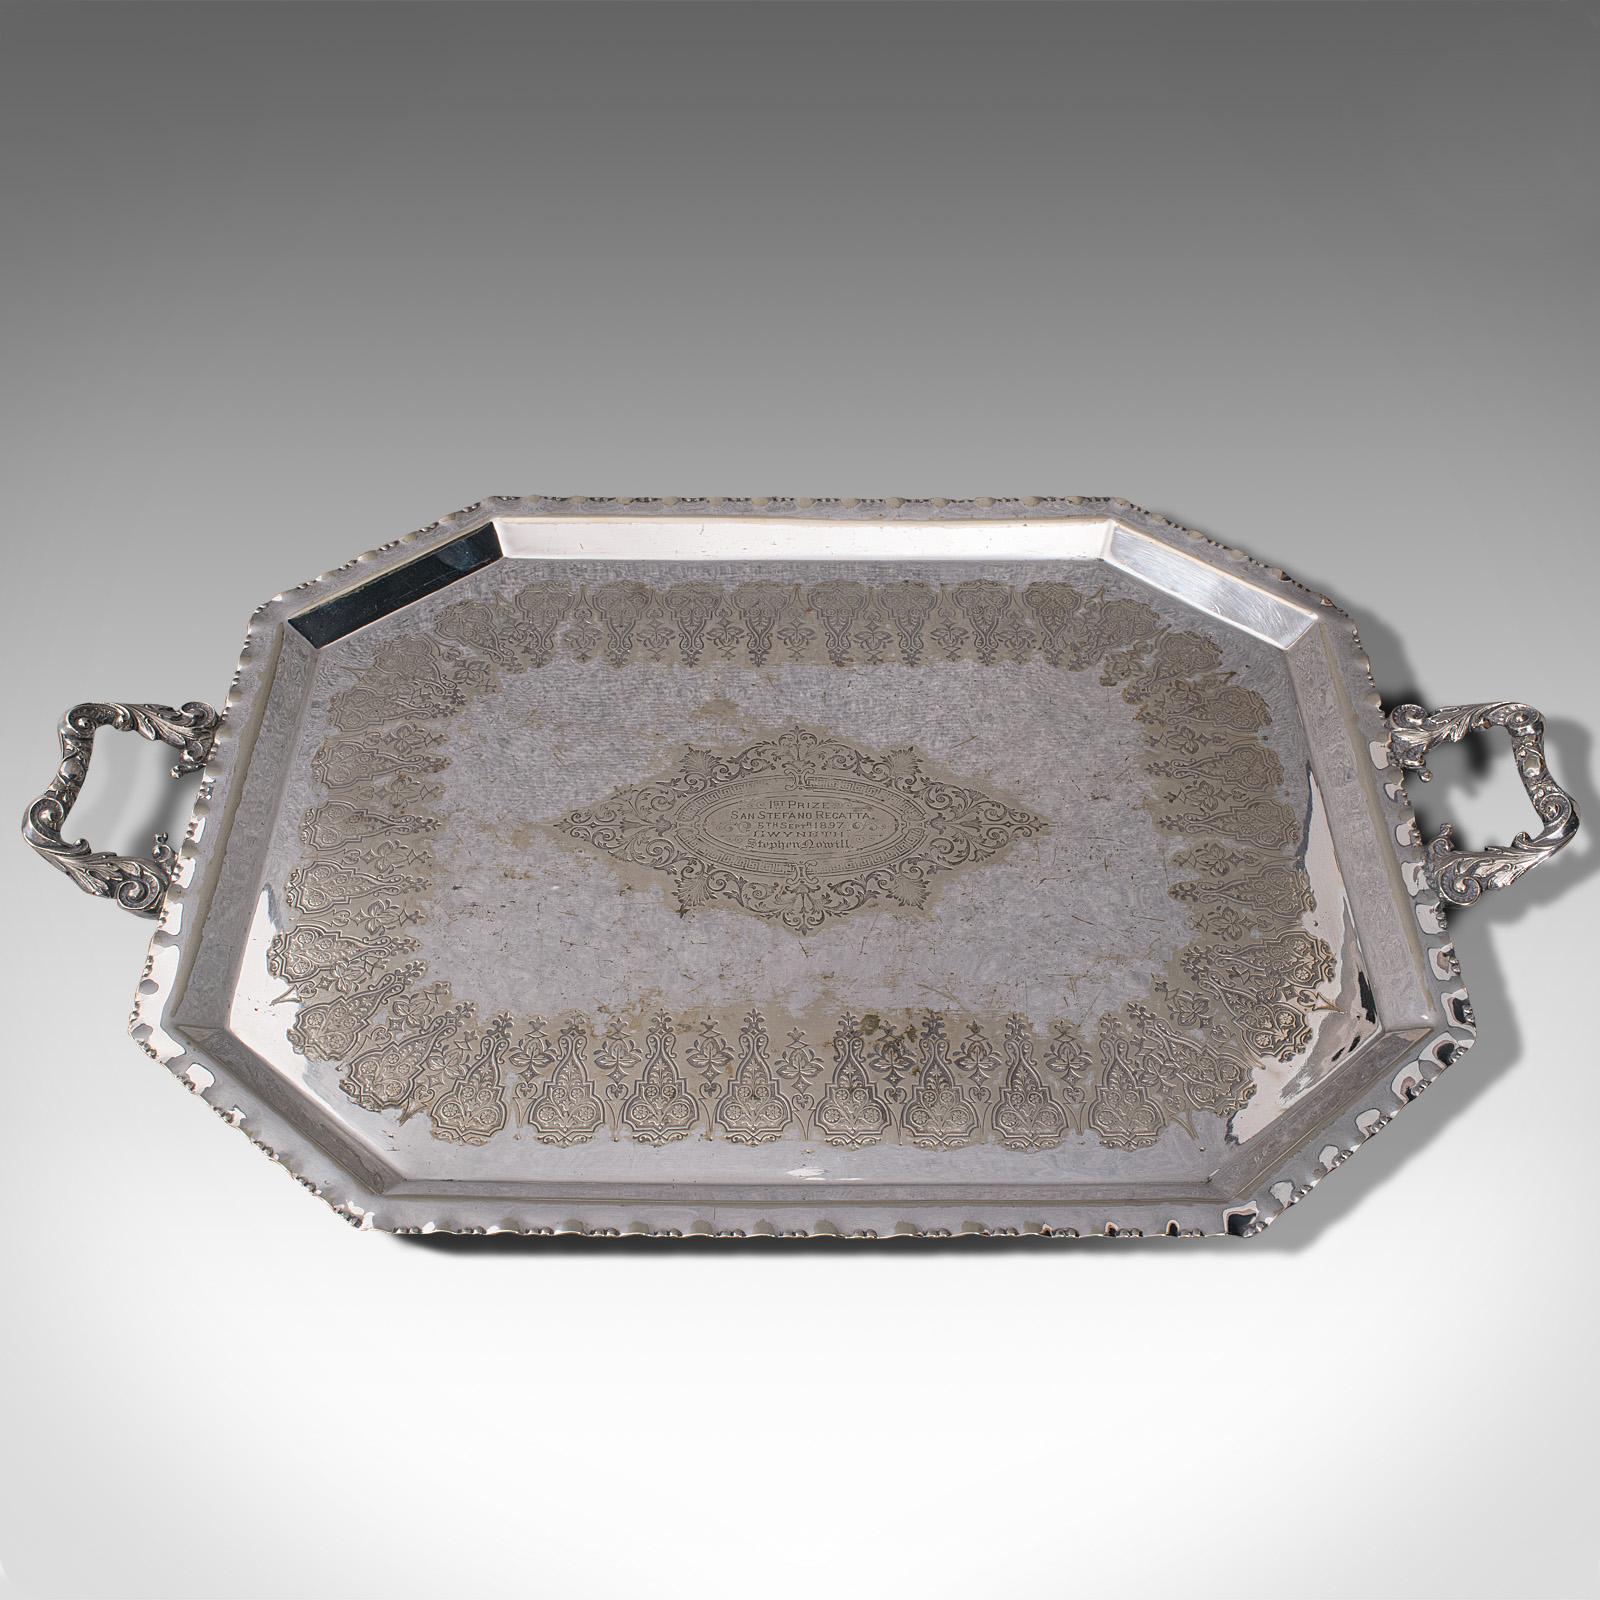 This is an antique presentation serving tray. An English, silver plated afternoon tea platter, dating to the late Victorian period, circa 1895.

Prize-winning celebration tray with fascinating detail
Displays a desirable aged patina, with light